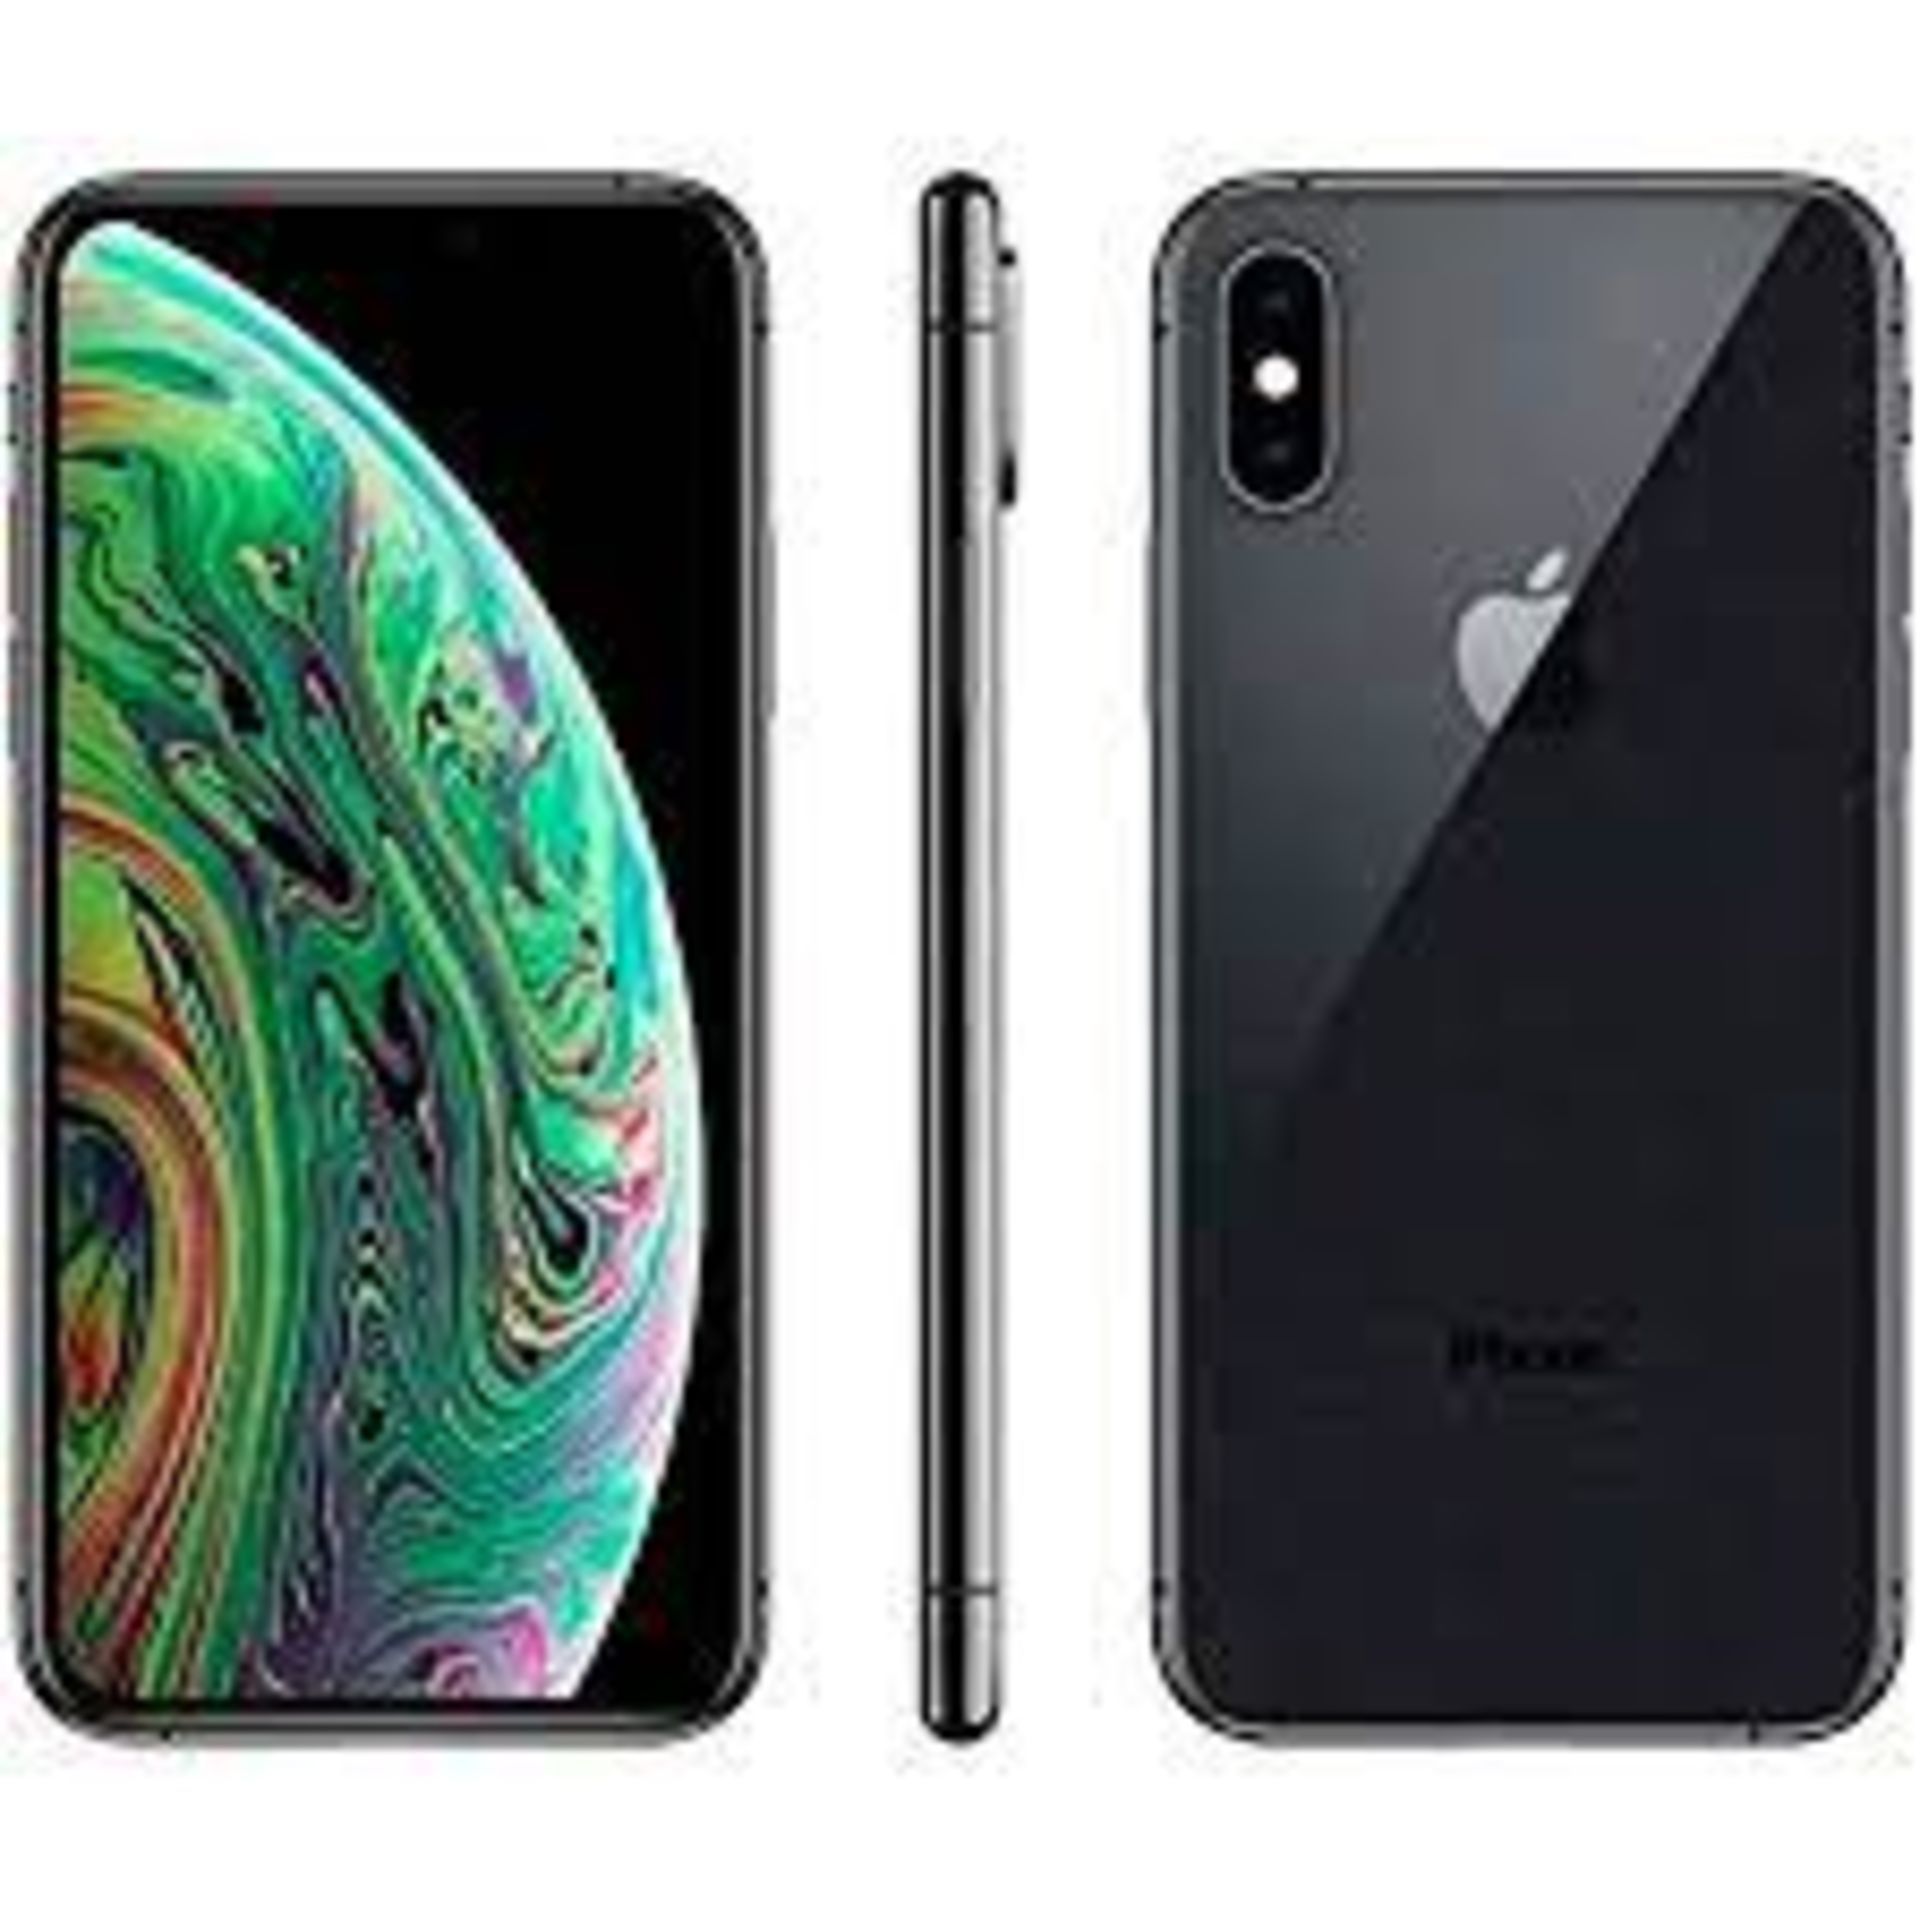 APPLE IPHONE XS 64GB SPACE GREY OFF